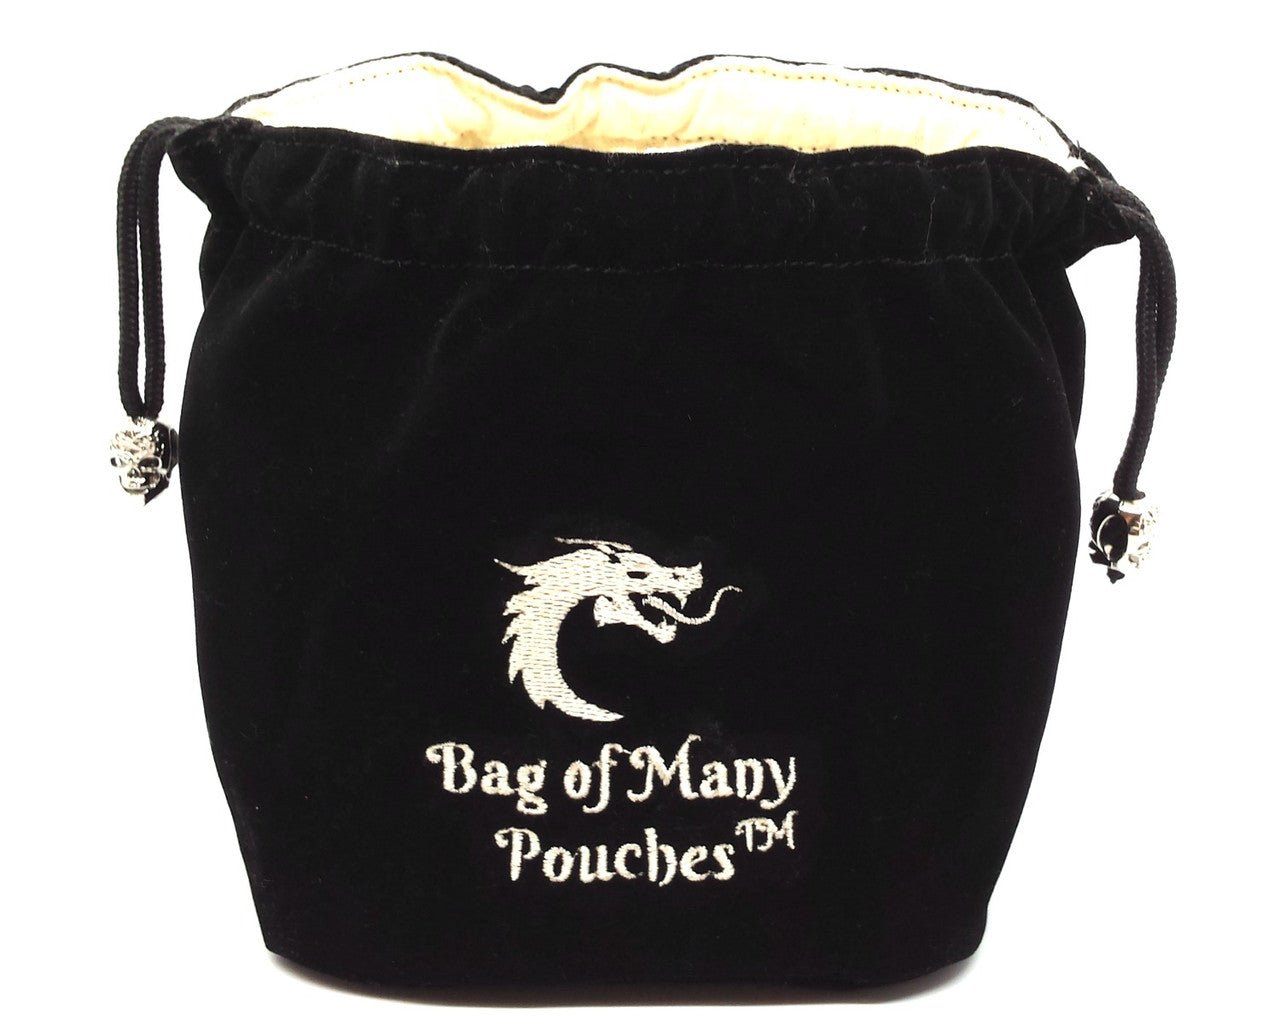 Old School Dice: Bag of Many Pouches - Black - Gamescape